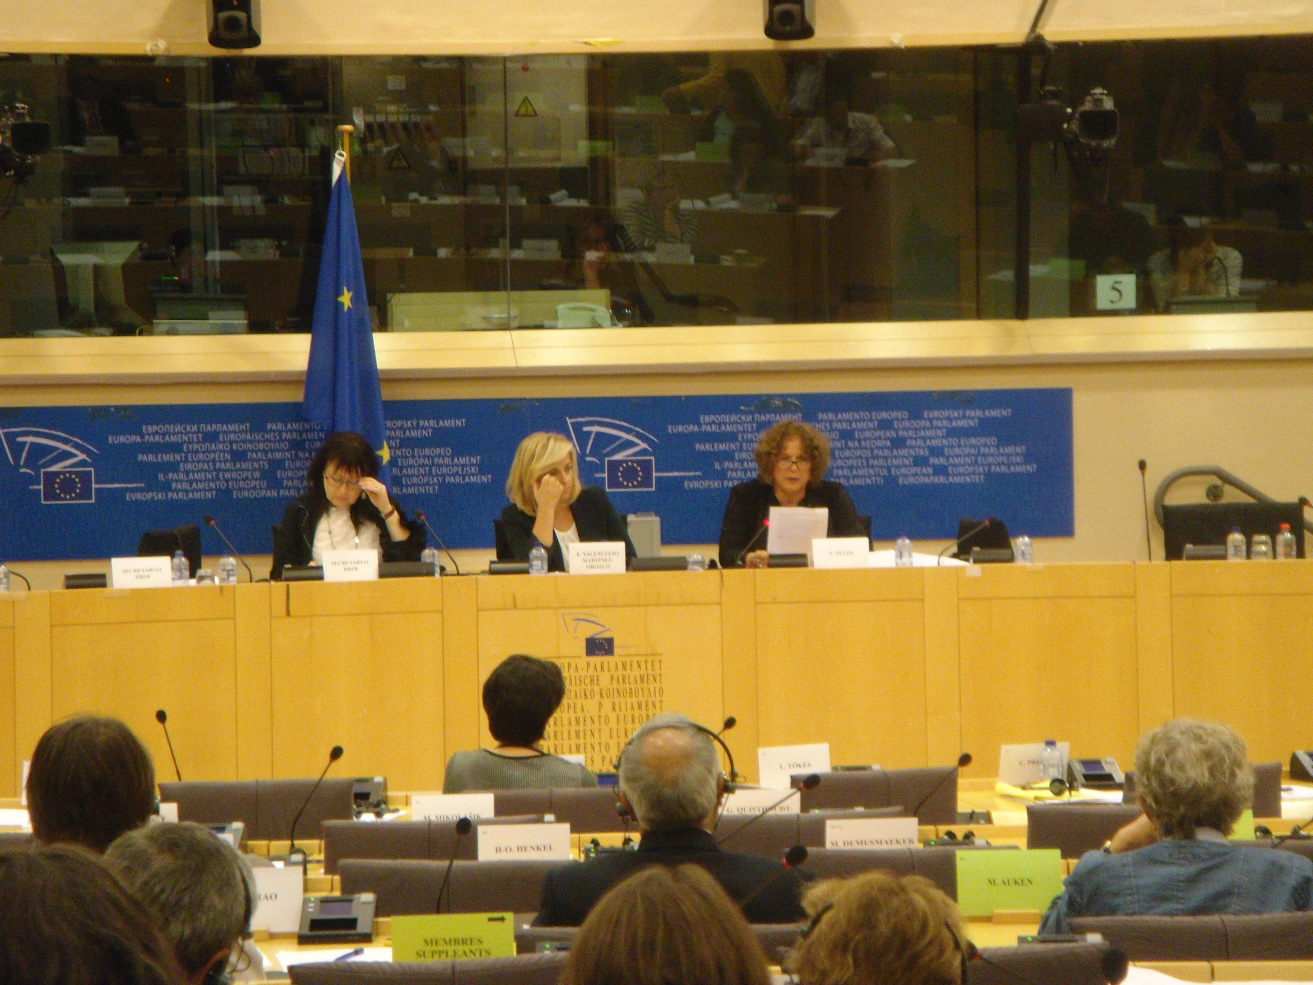 Israeli professor Nurit Peled (on the right) speaking in the EP